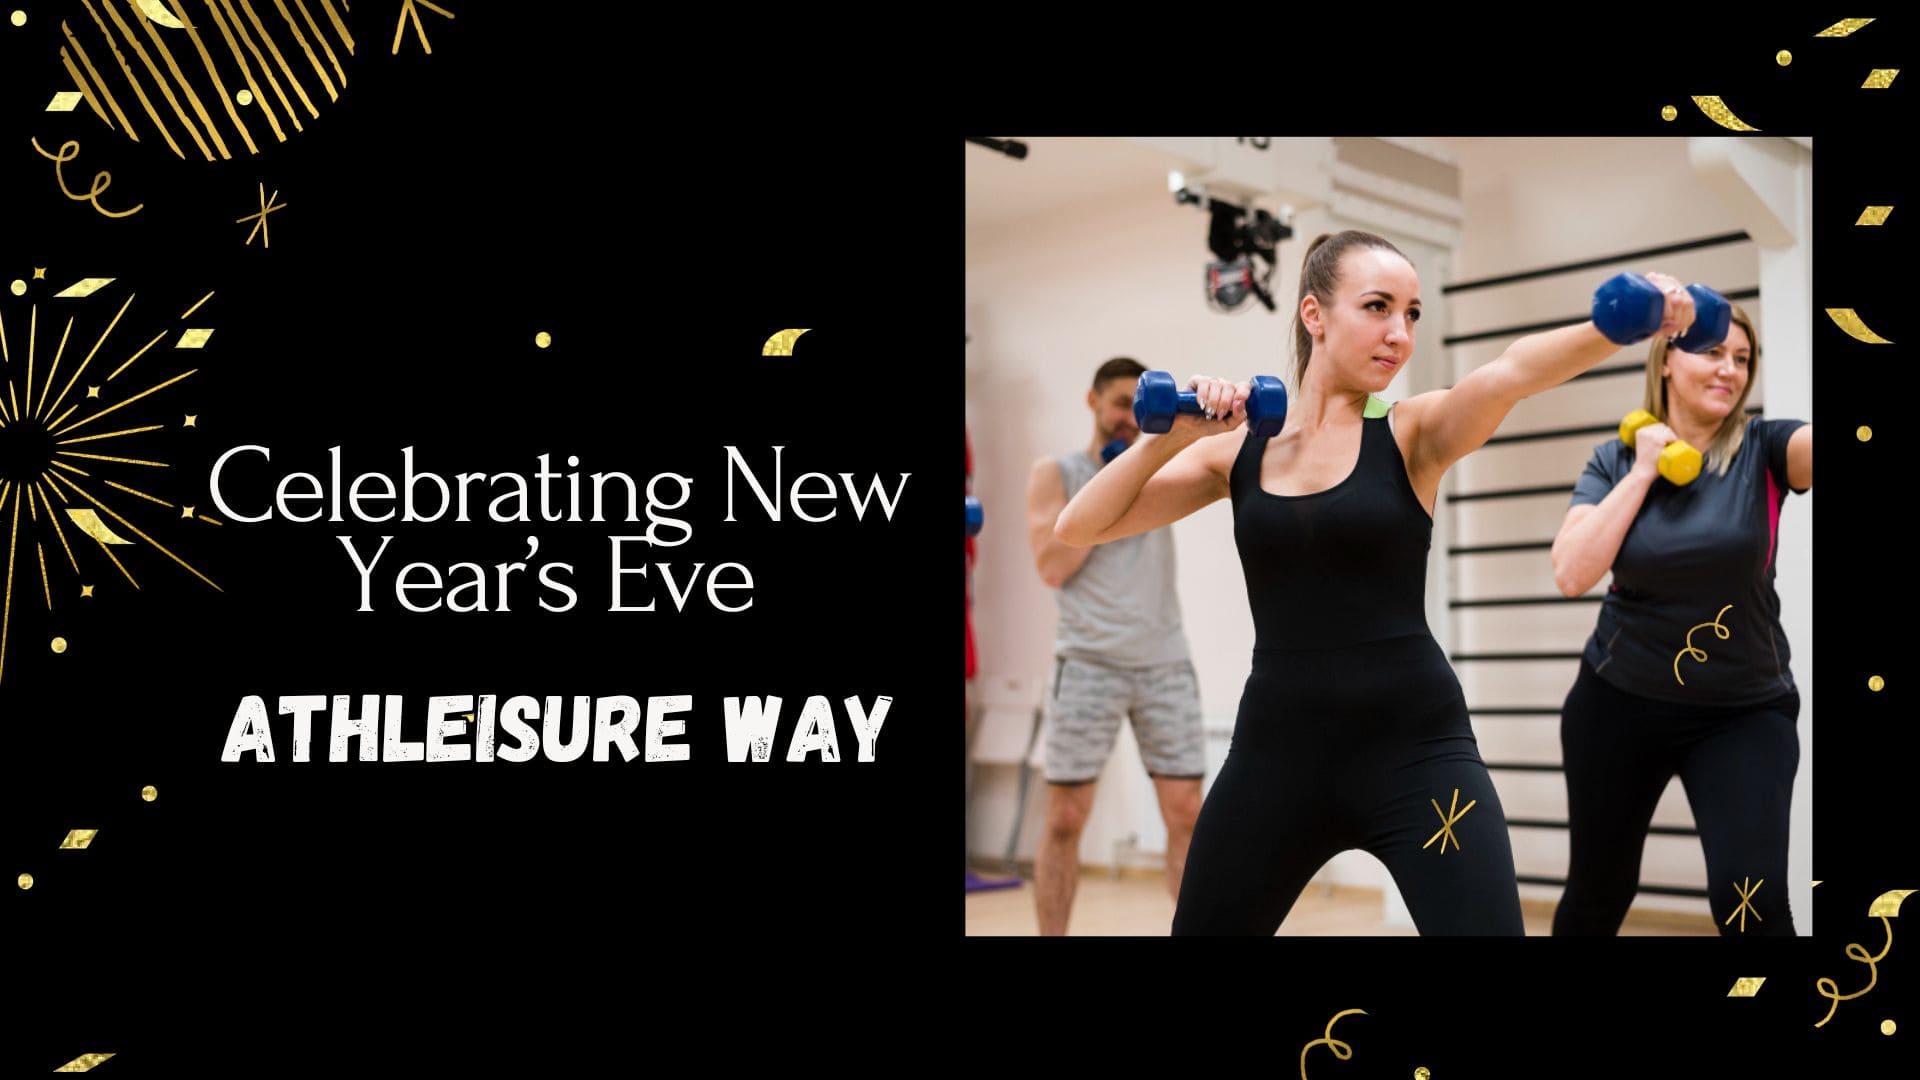 New Year’s Eve athleisure outfits